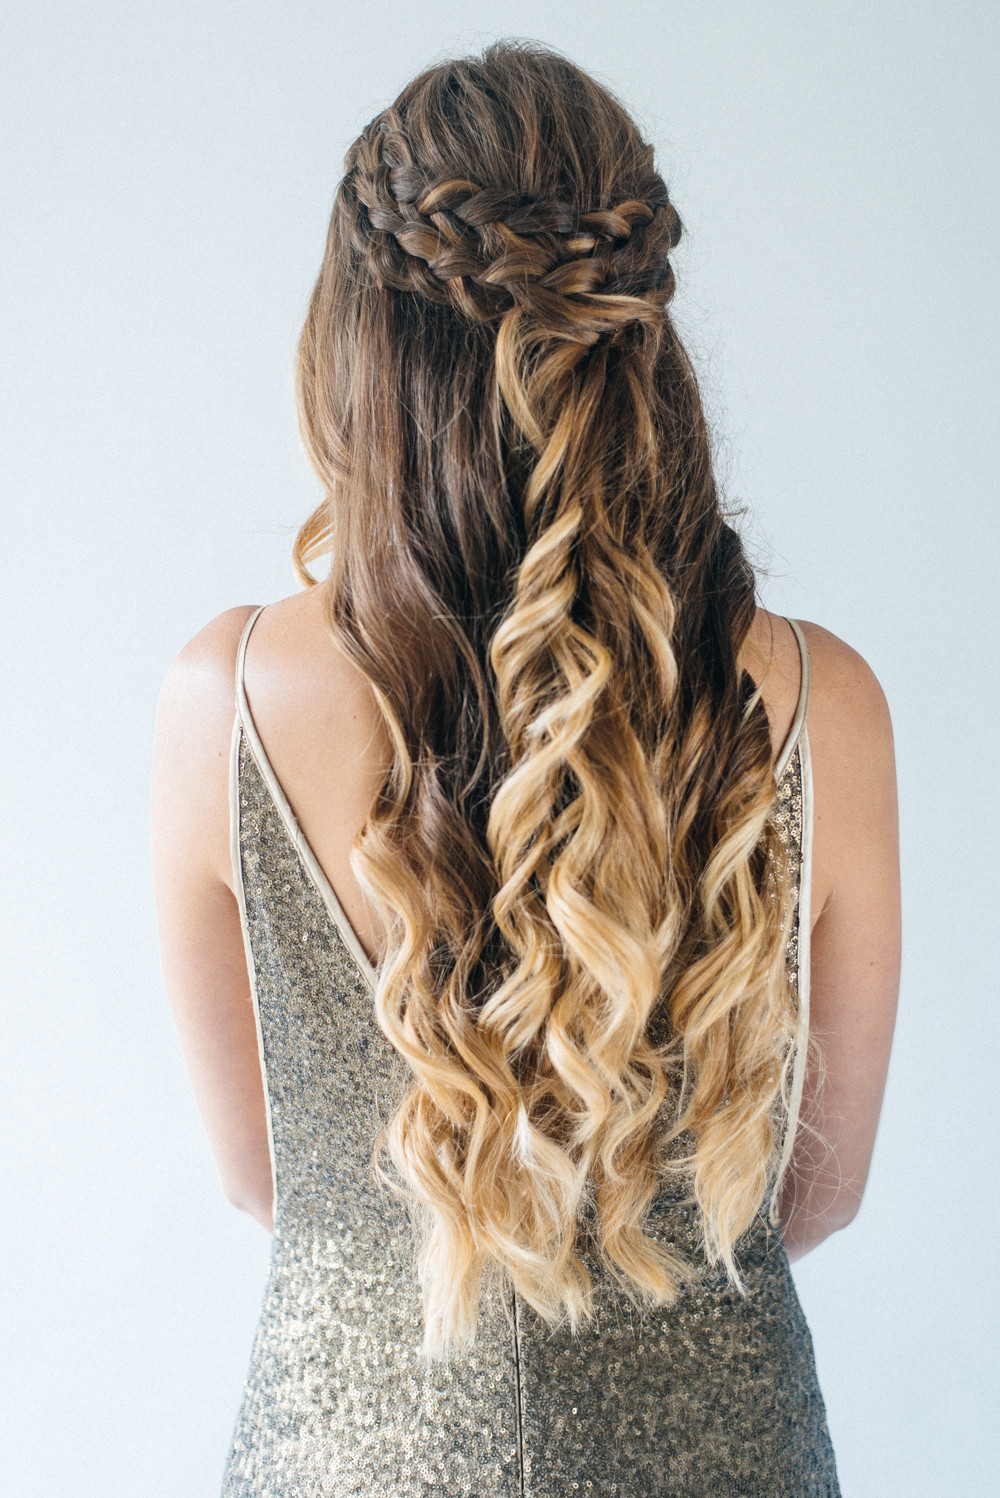 Wedding Hairstyles Long Hair Down
 Inspiration For Half Up Half Down Wedding Hair With